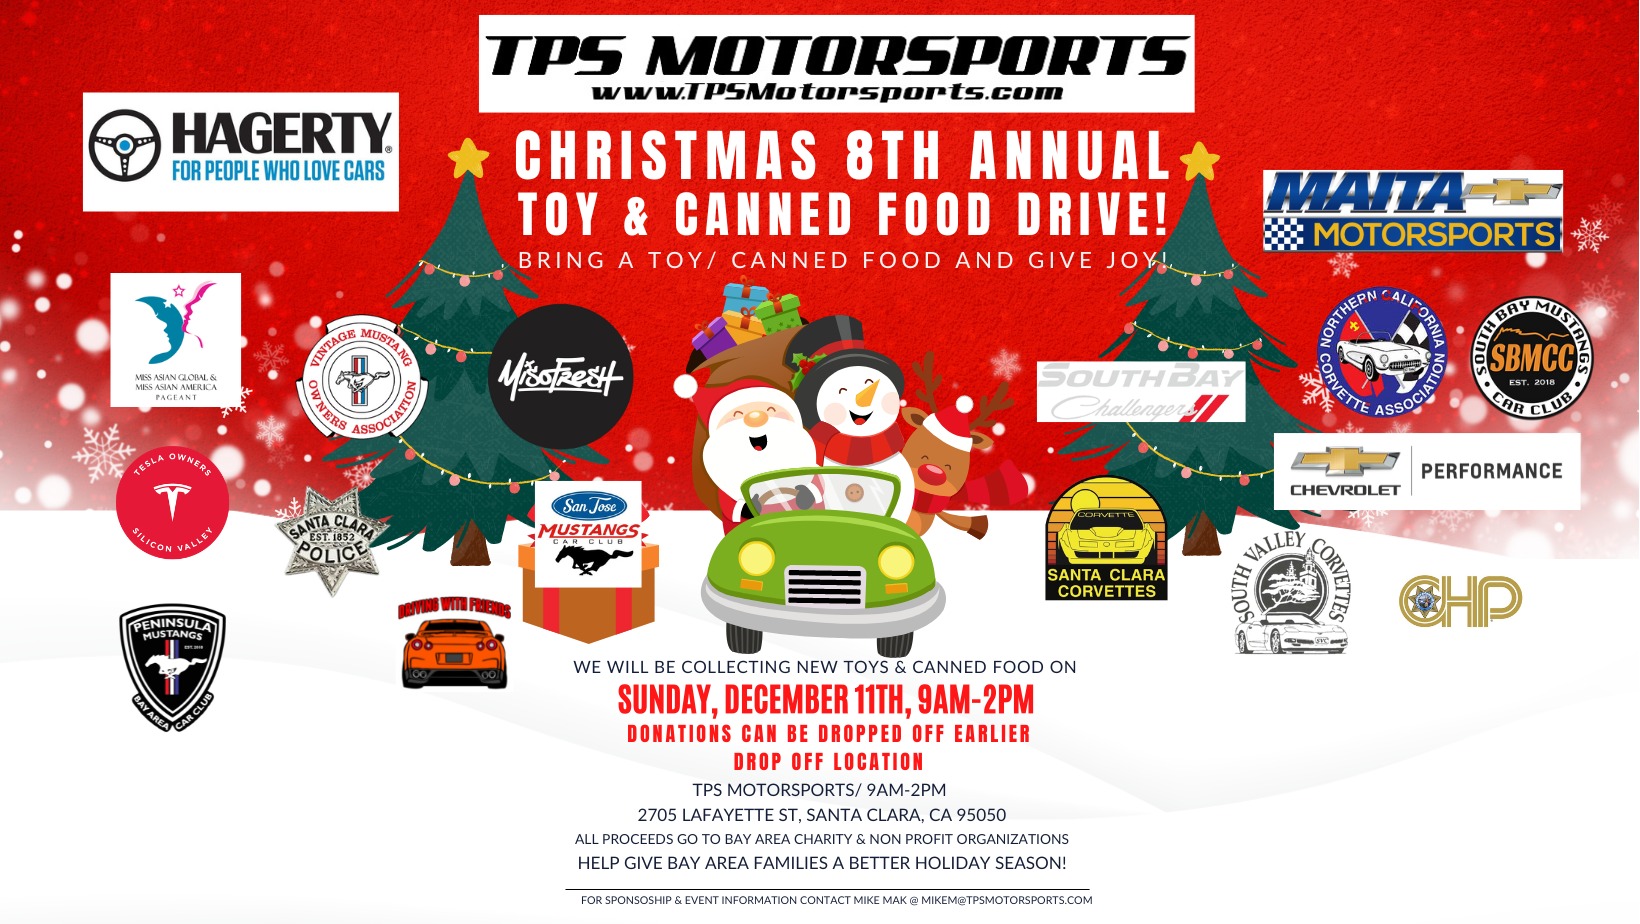 TPS Motorsports Toy & Canned Food Drive